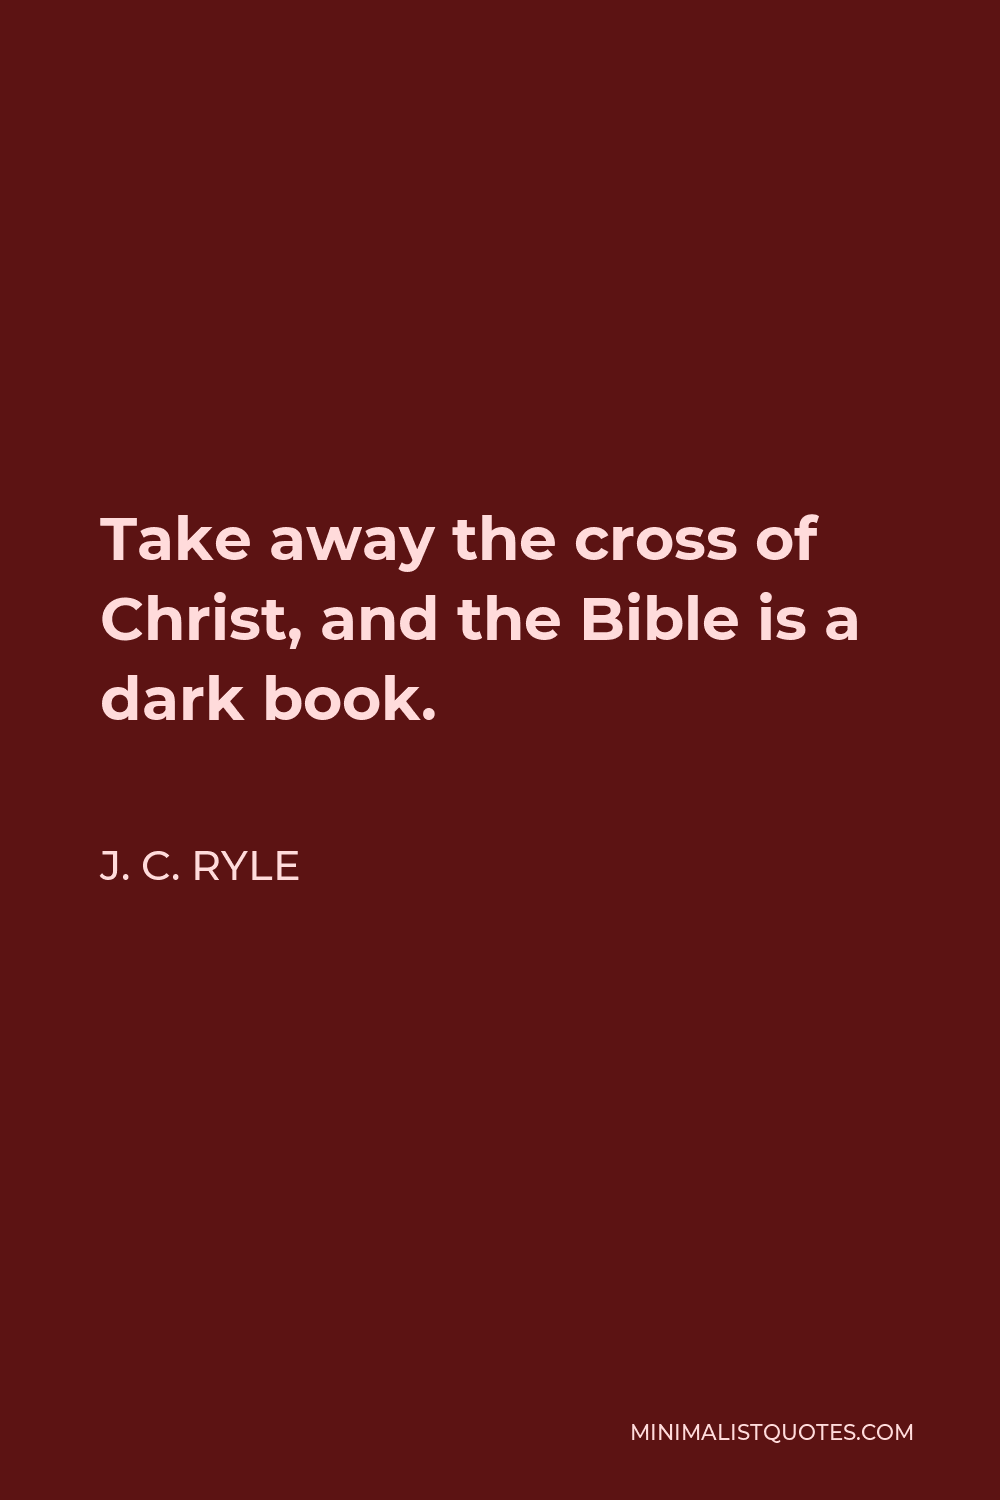 J. C. Ryle Quote - Take away the cross of Christ, and the Bible is a dark book.